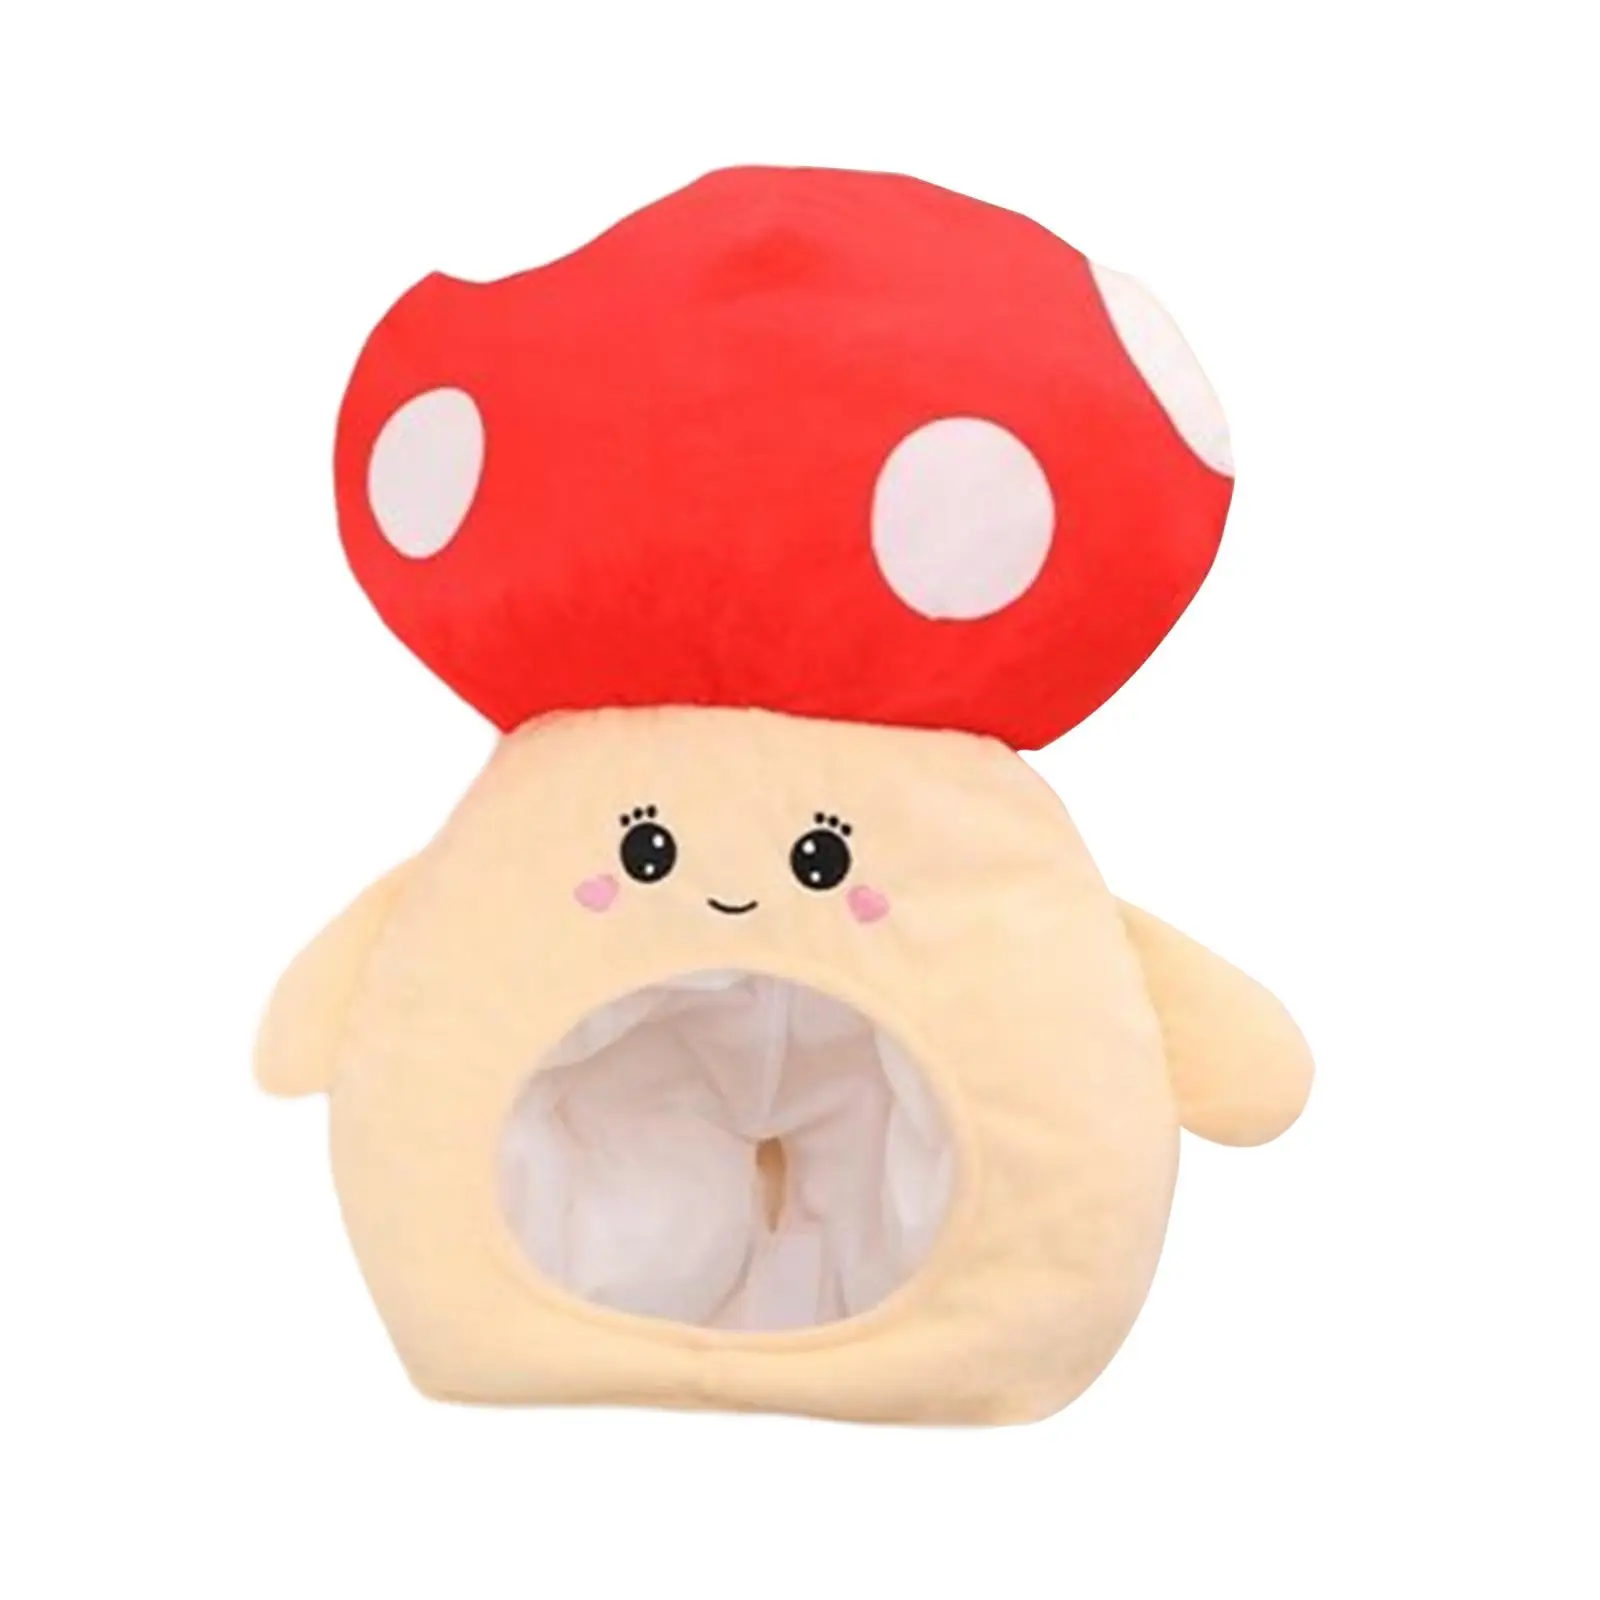 Cute Plush Mushroom Hat Cosplay Headwear for Adults Kids Selfie Novelty Hats Party Hats Headgear for Holiday Photo Props